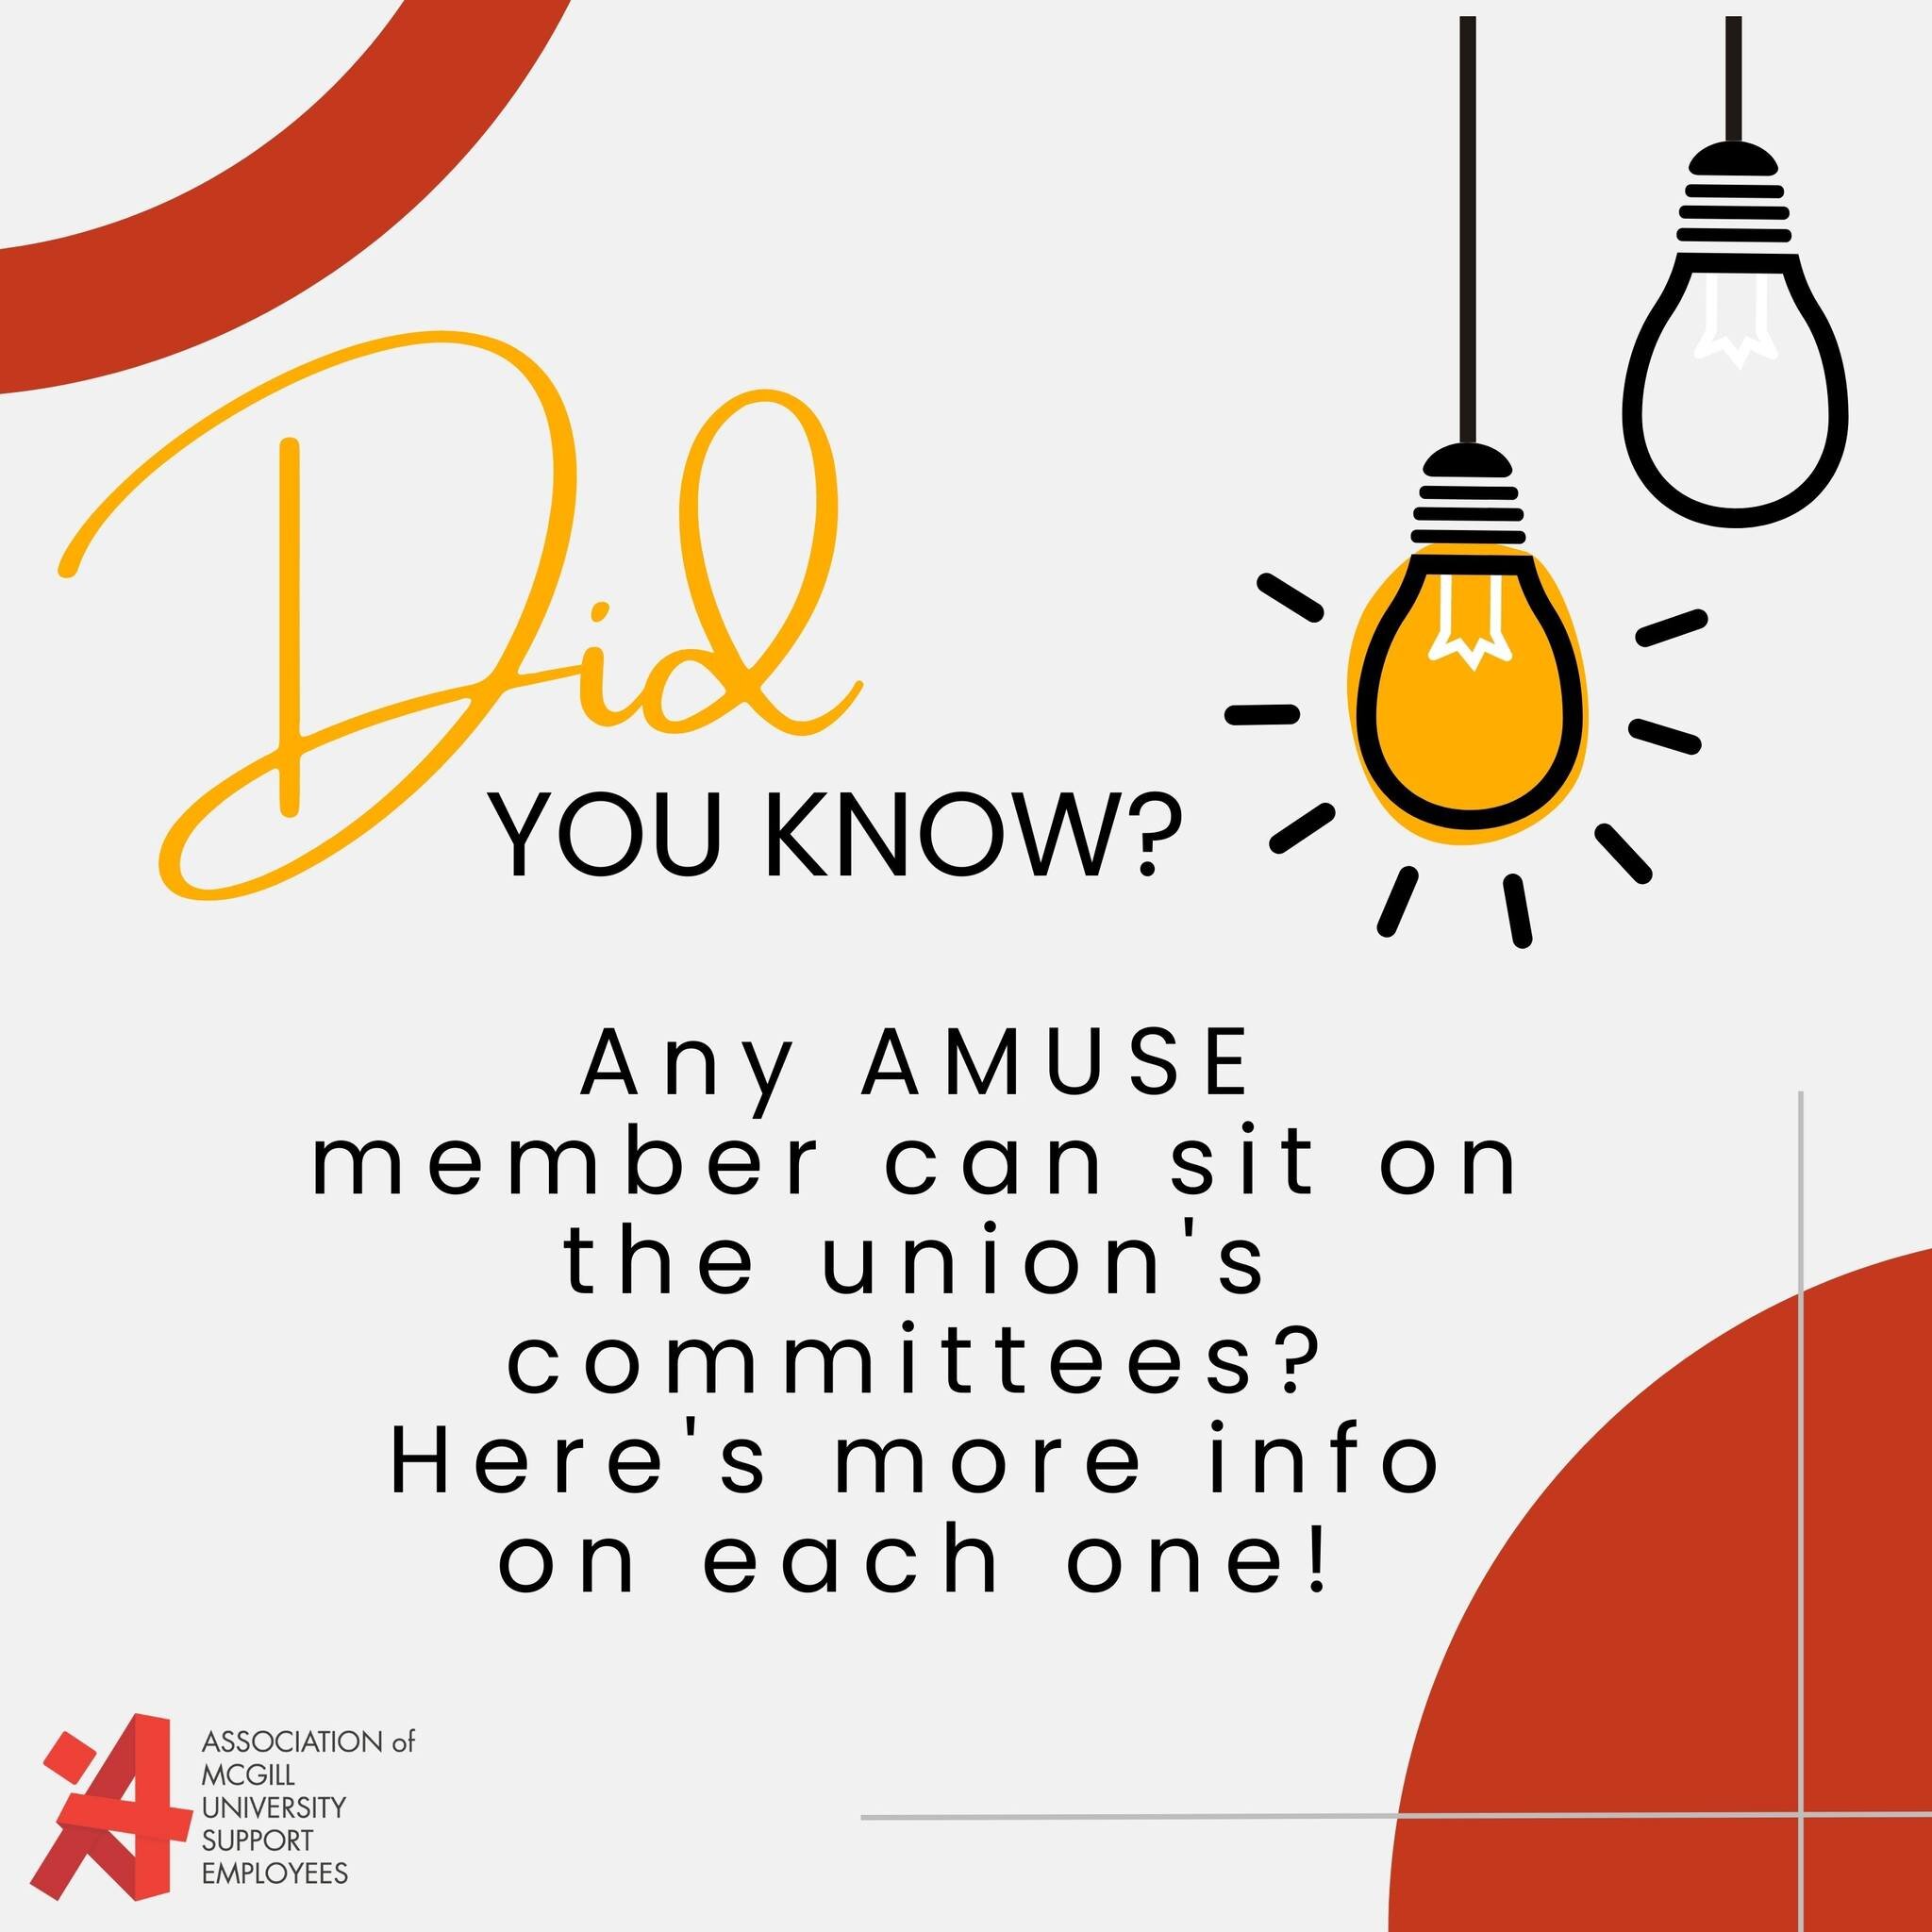 AMUSE Committees! Did you know? 
(La version fran&ccedil;aise dans un post s&eacute;par&eacute;)

Any AMUSE member can sit on the union's committees? Here's more info on each one!

Maybe you've wanted to get involved but don't have the capacity to co